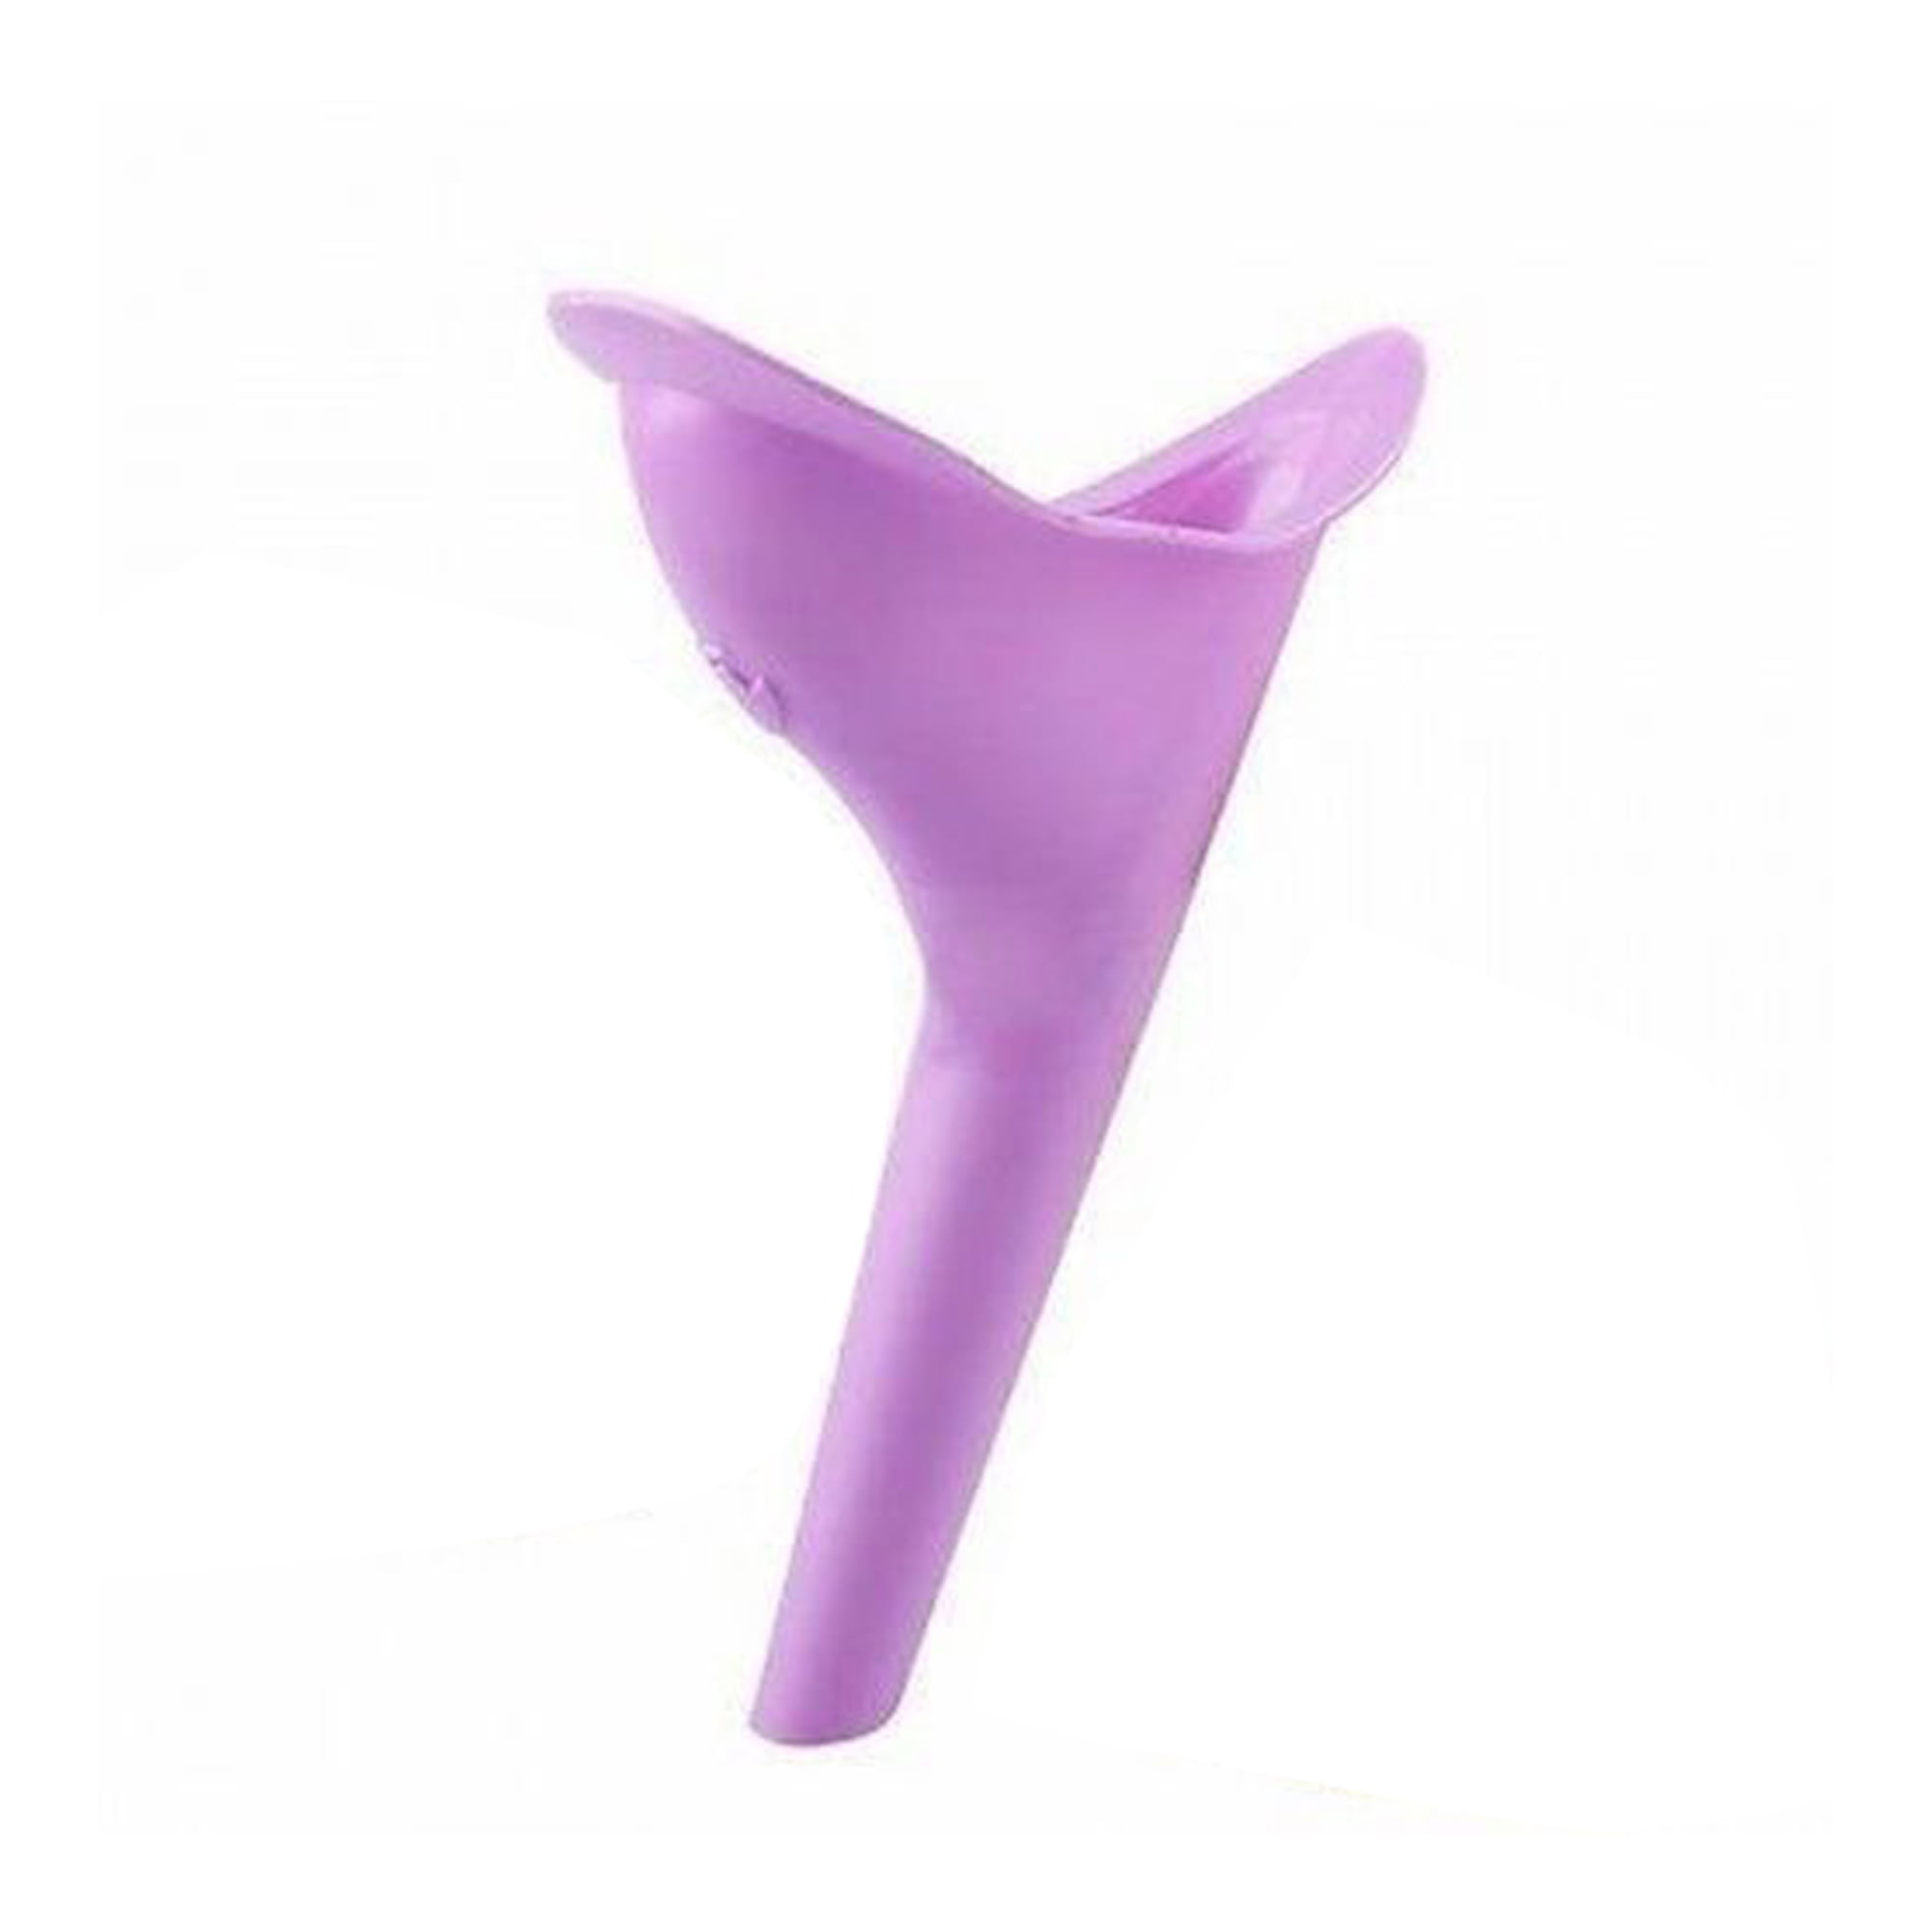 1Pcs Portable Camping Female Her She Urinal Funnel Ladies Woman Urine Wee Travel 